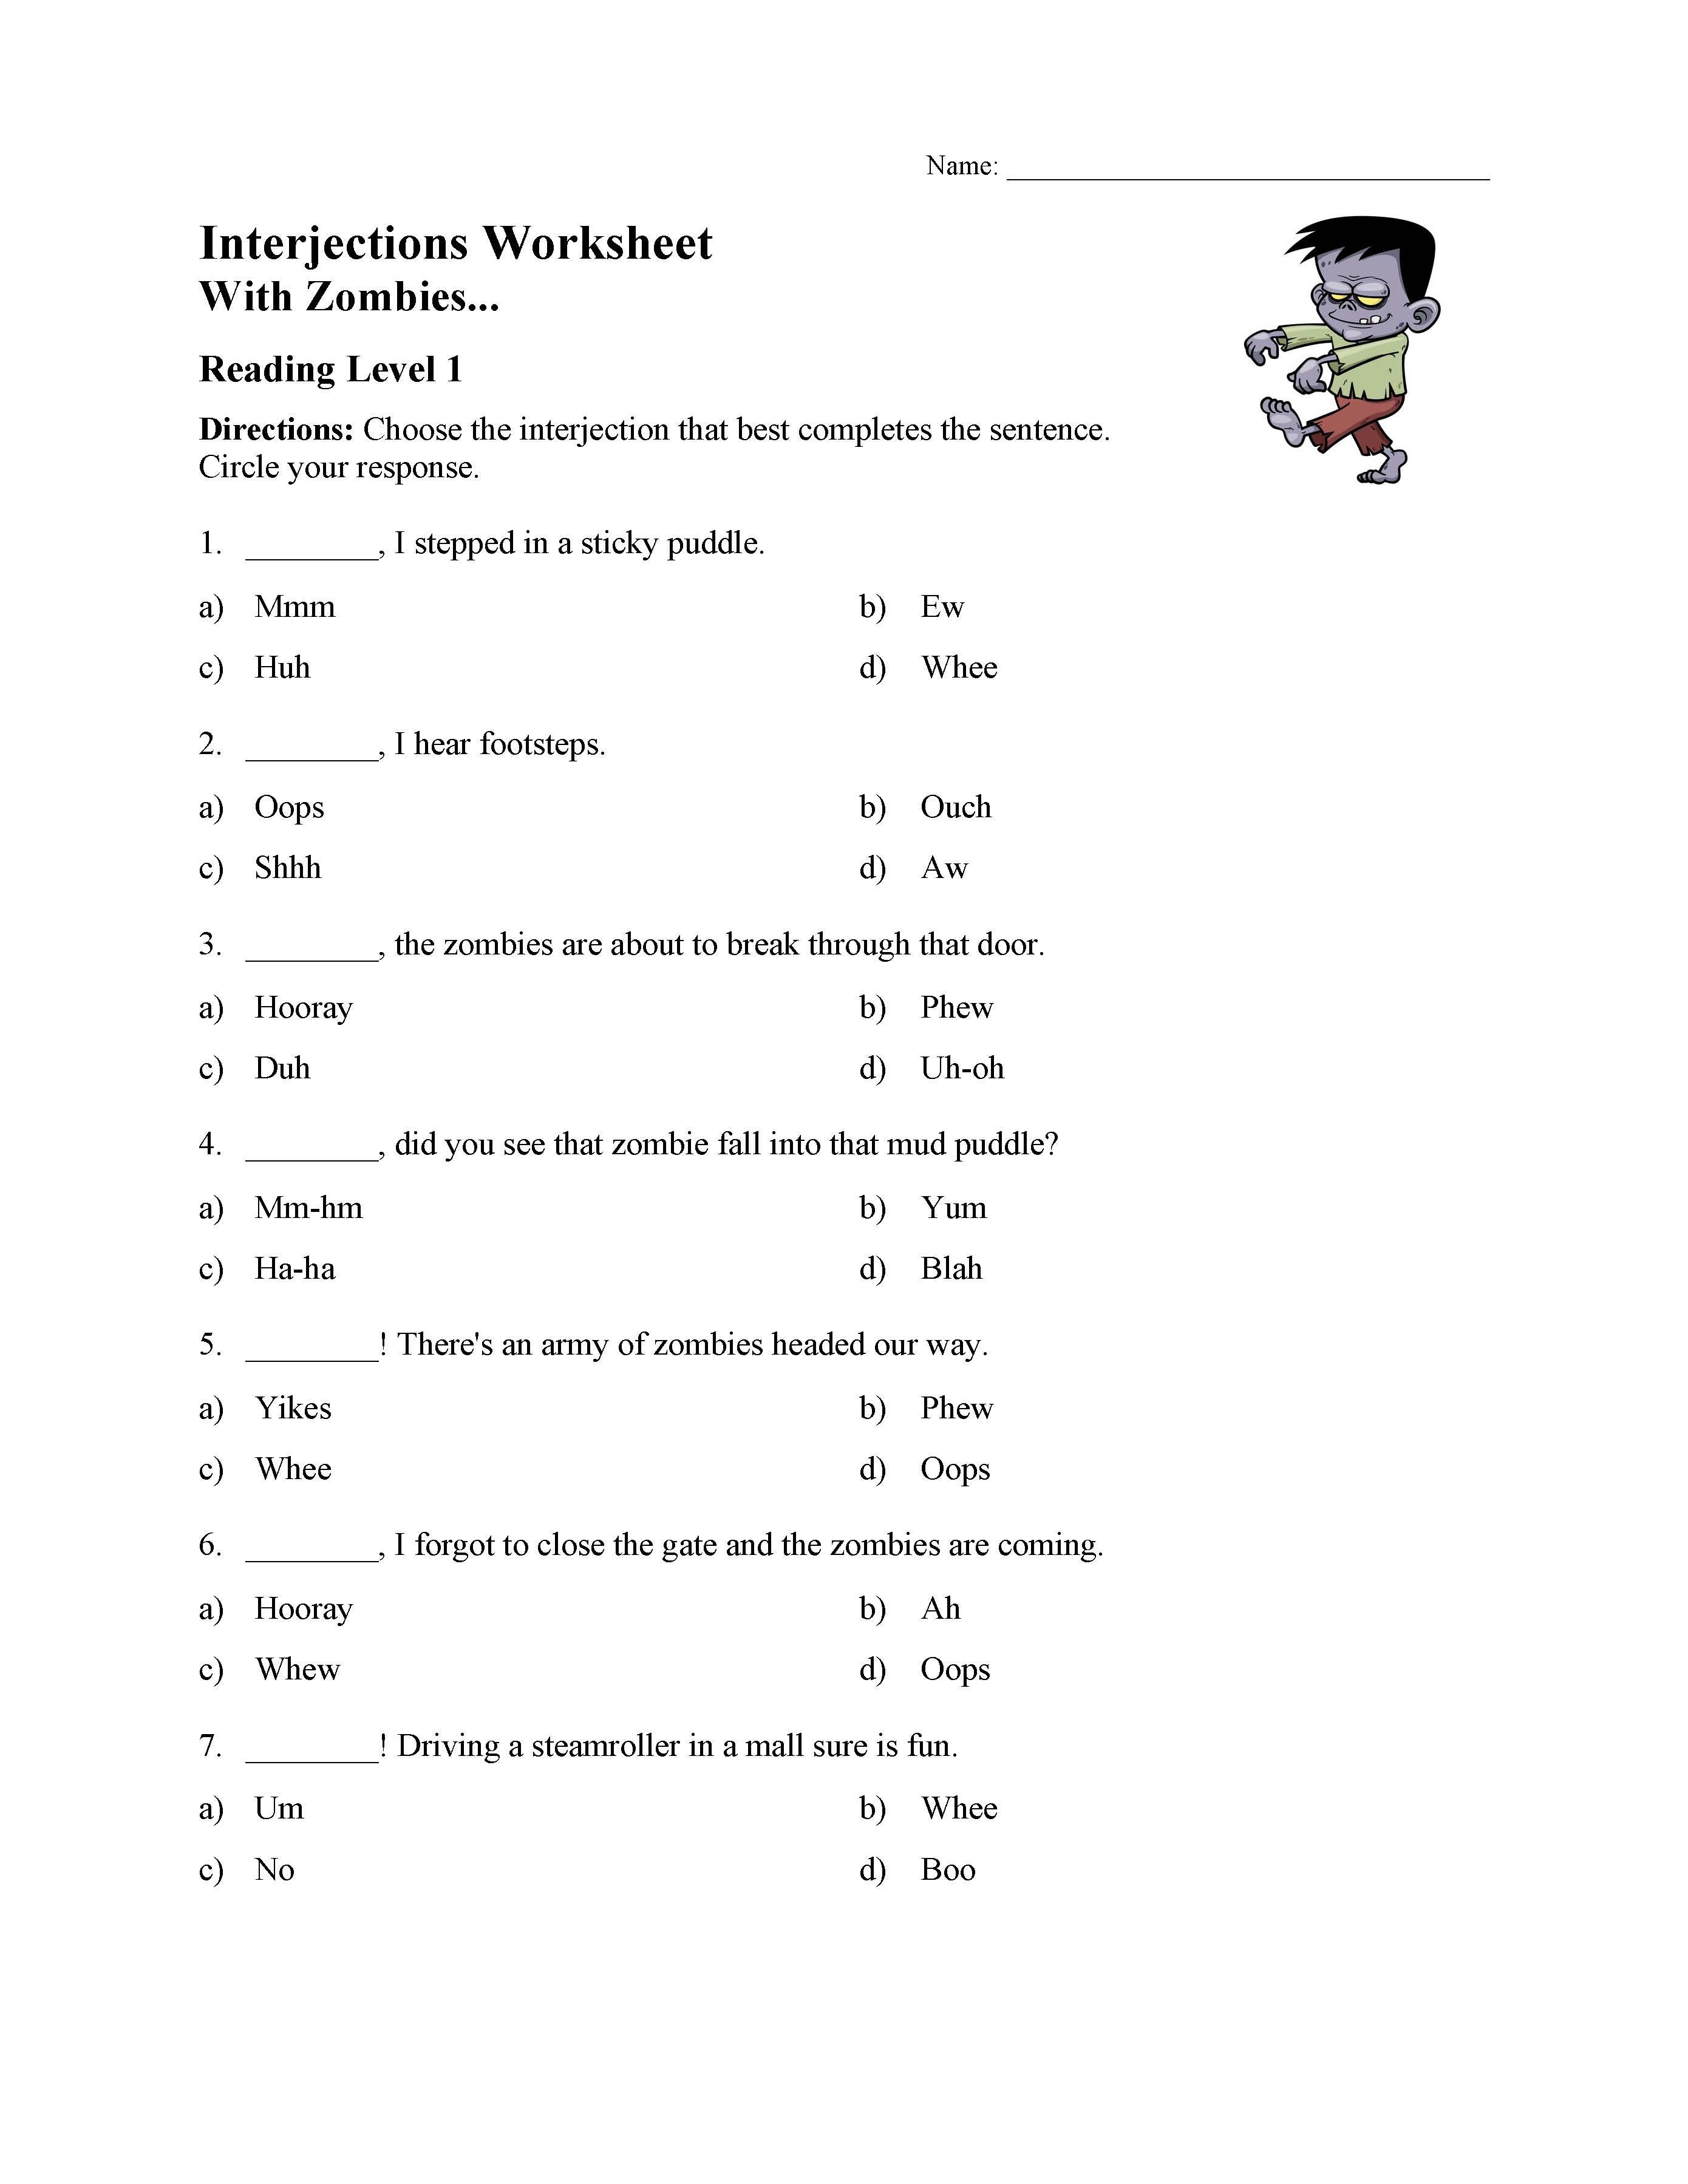 Interjections Worksheet 5th Grade Promotiontablecovers